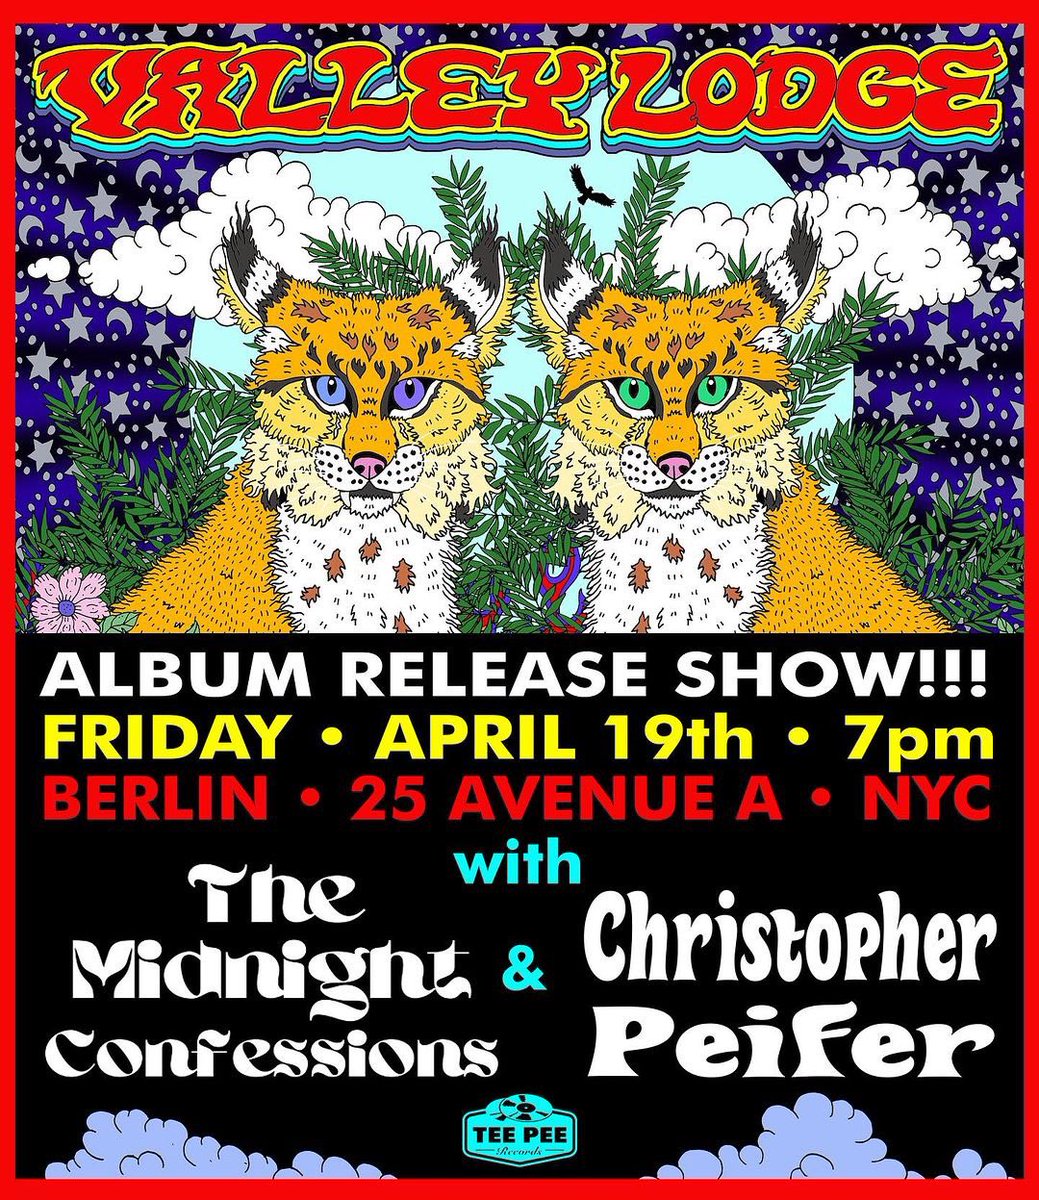 My rock band Valley Lodge is playing tomorrow, Friday April 19, in NYC at Berlin! Come!